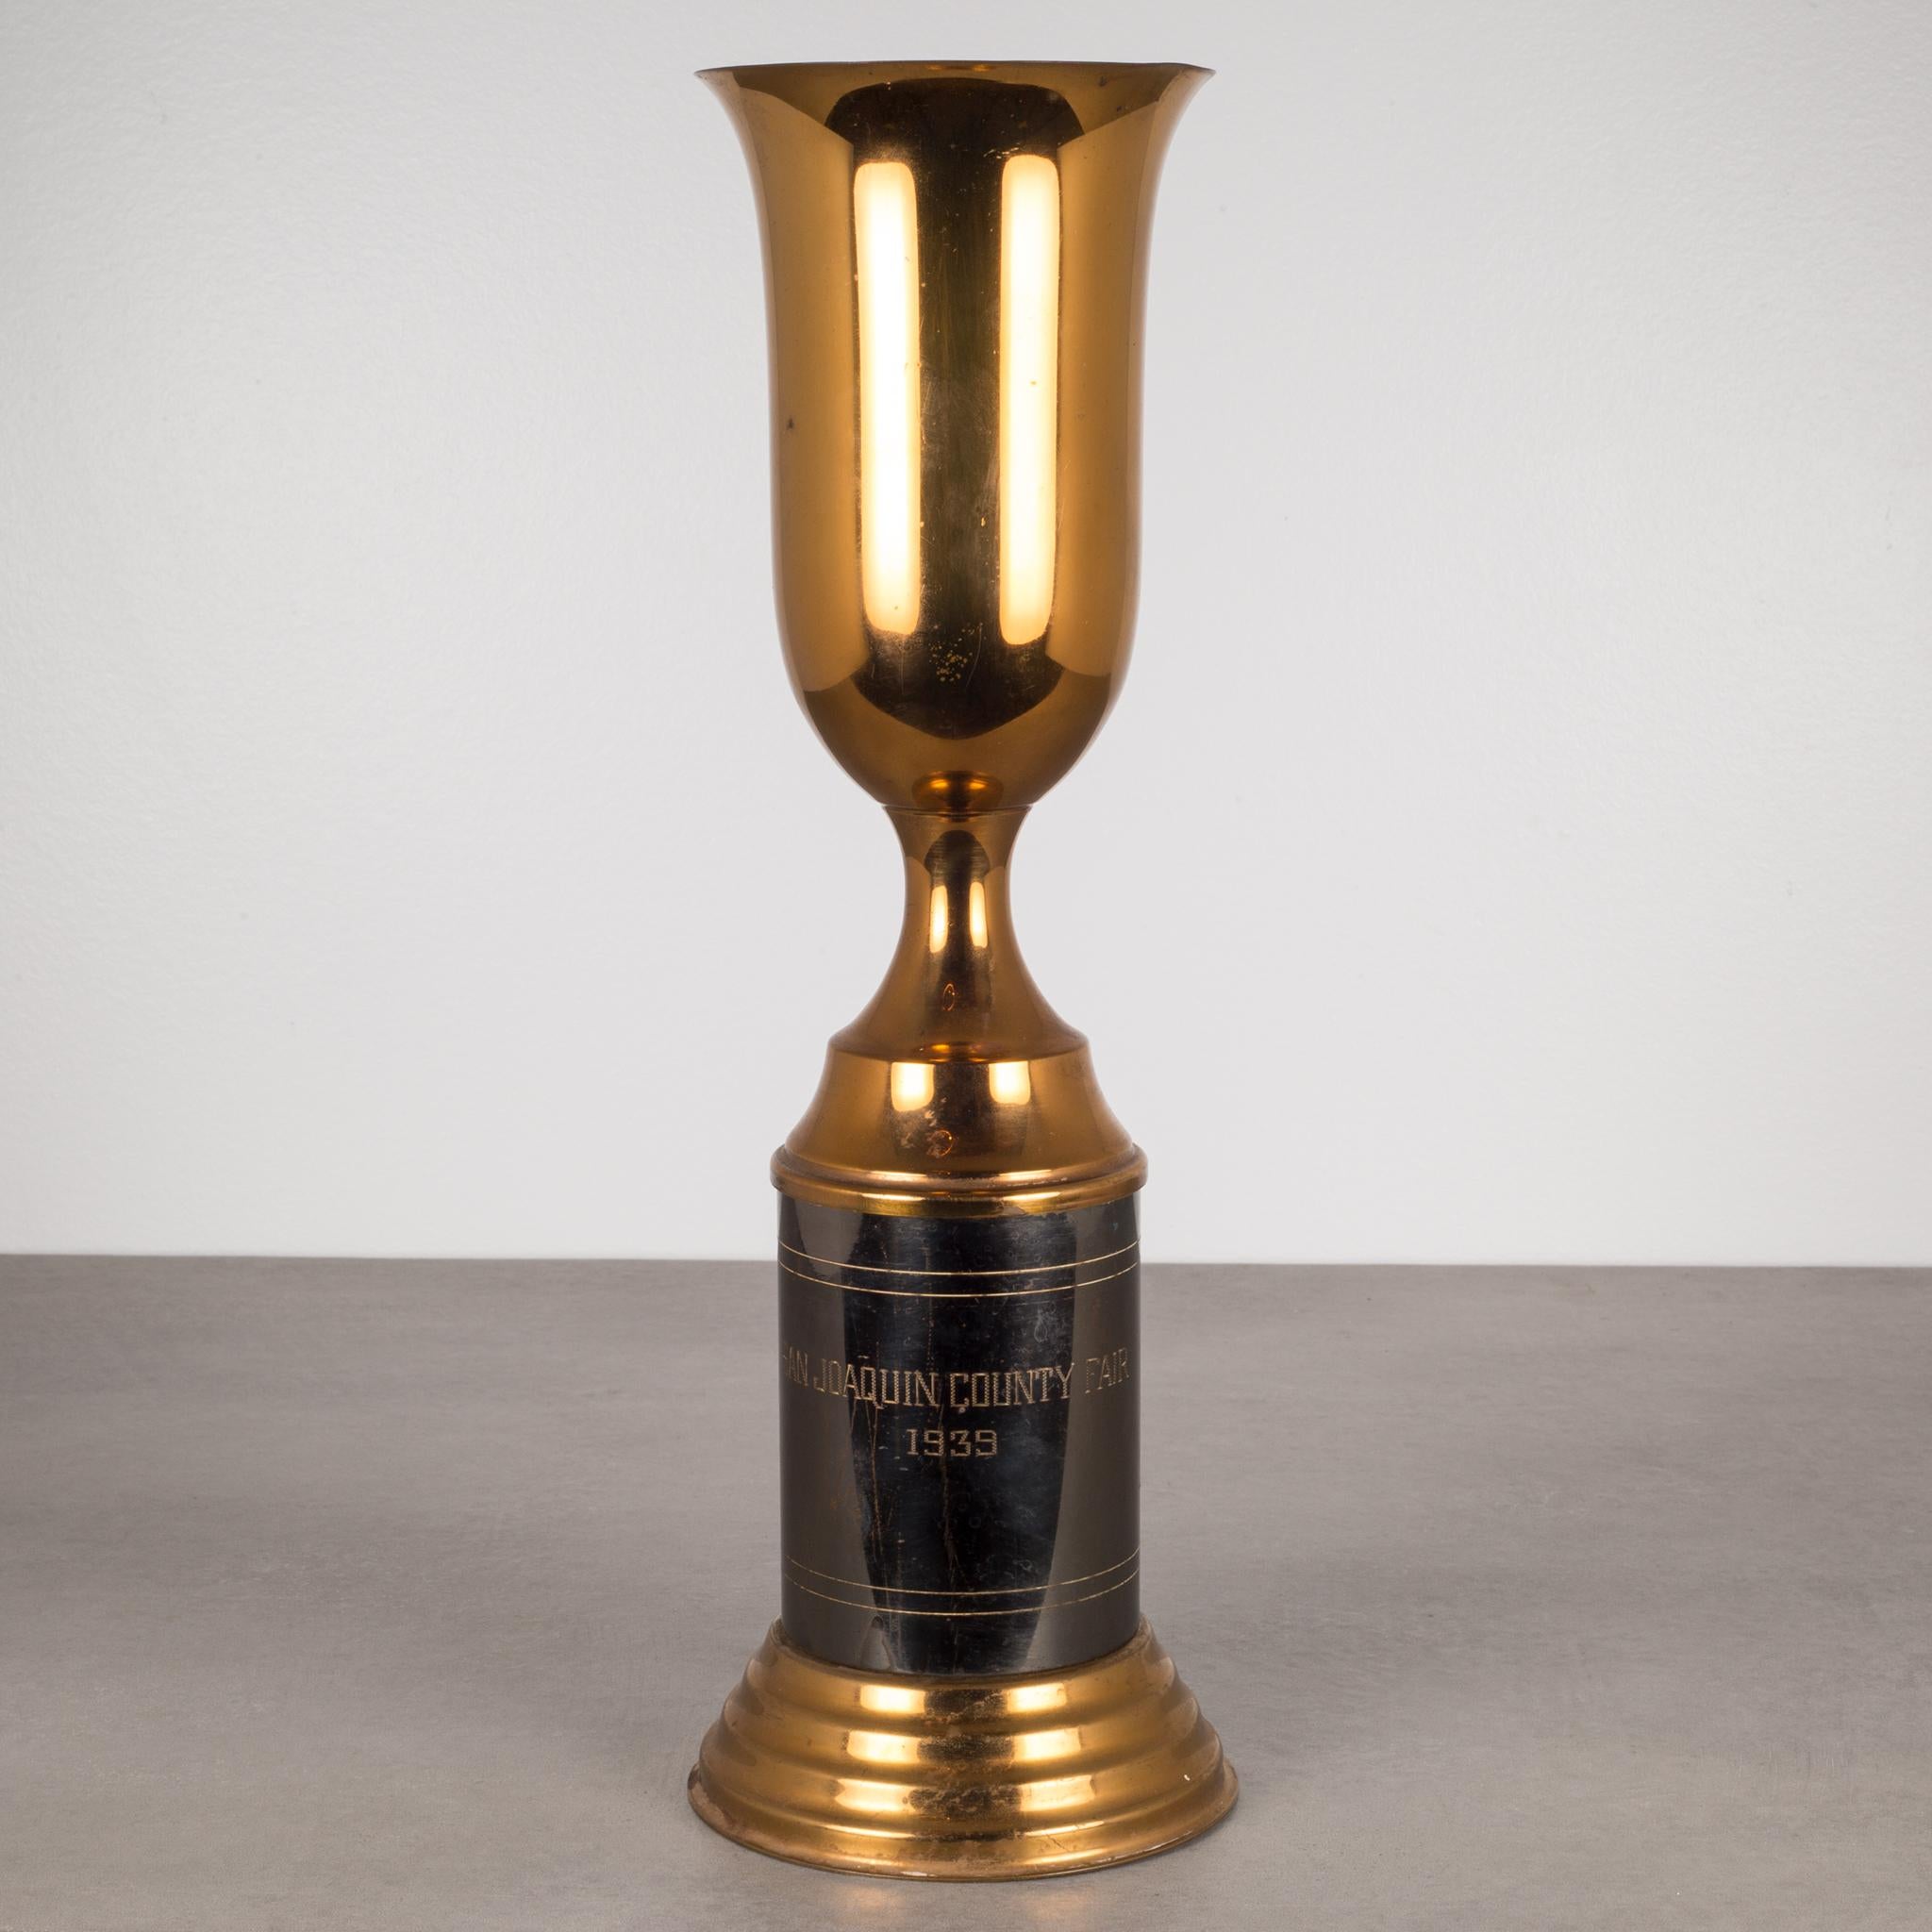 ABOUT

This is an original solid brass trophy cup from the San Joaquin County Fair, California USA, 1939. The large brass cup is mounted on pewter column that has been engraved 